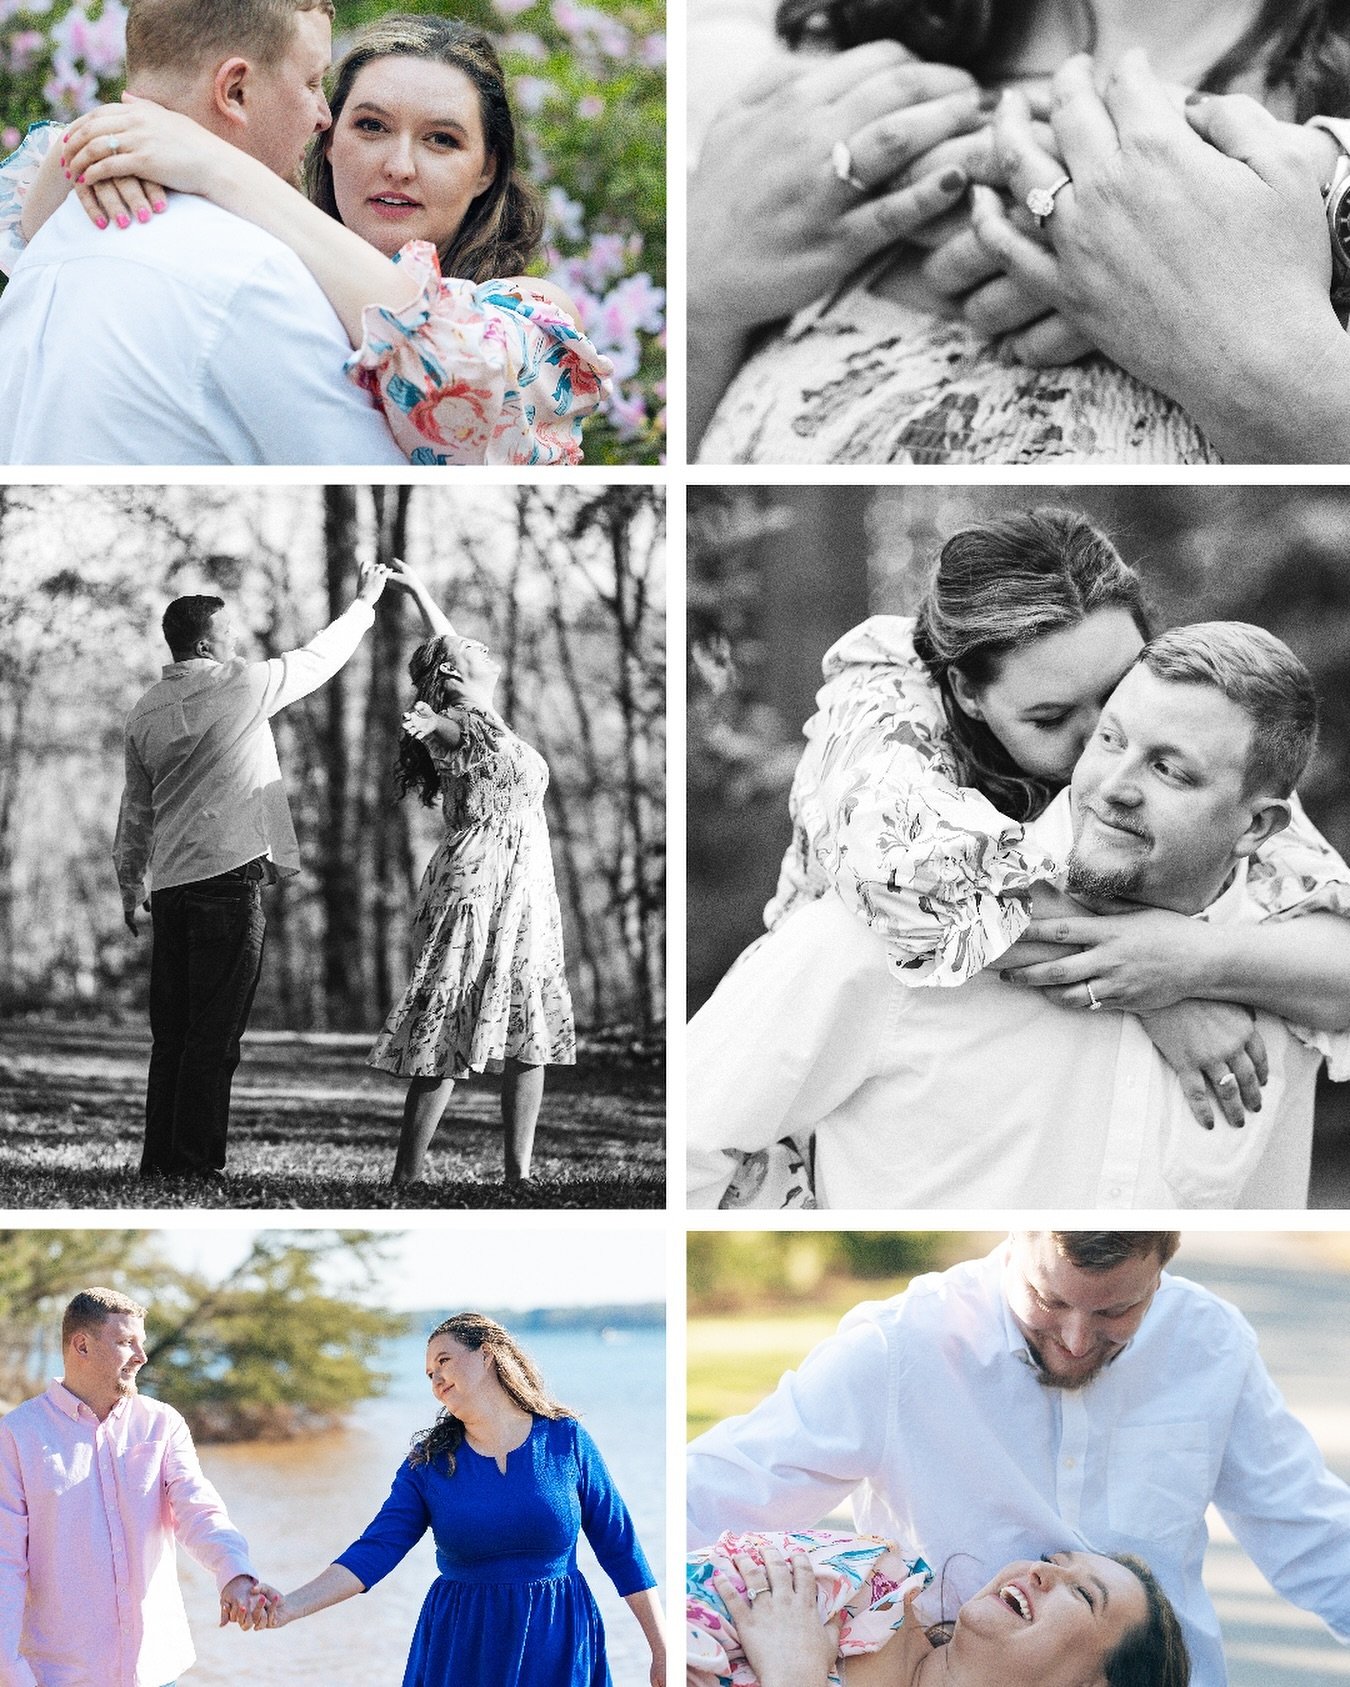 We&rsquo;ve had the opportunity to work with a wide variety of couples over the past several years.
All of those couples have been consistent in being great to work with. For a lot of people, engagement photos, wedding photos are some of the first ti